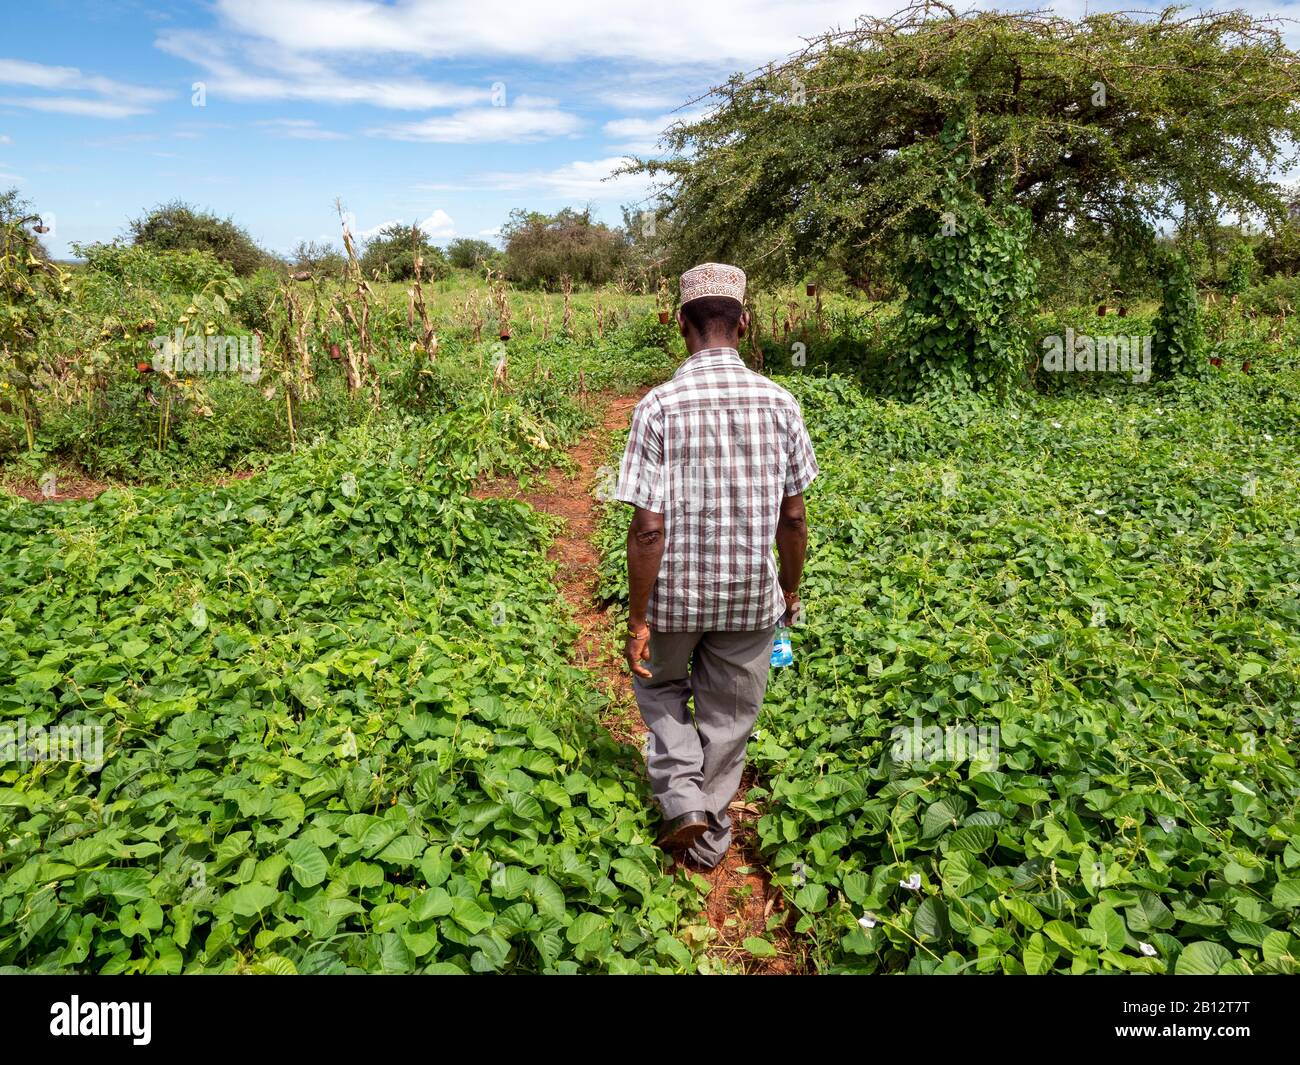 A farmer setting out to inspect his beehive fence built to deter elephants from raiding crops in Sagalla near Voi Southern Kenya Stock Photo